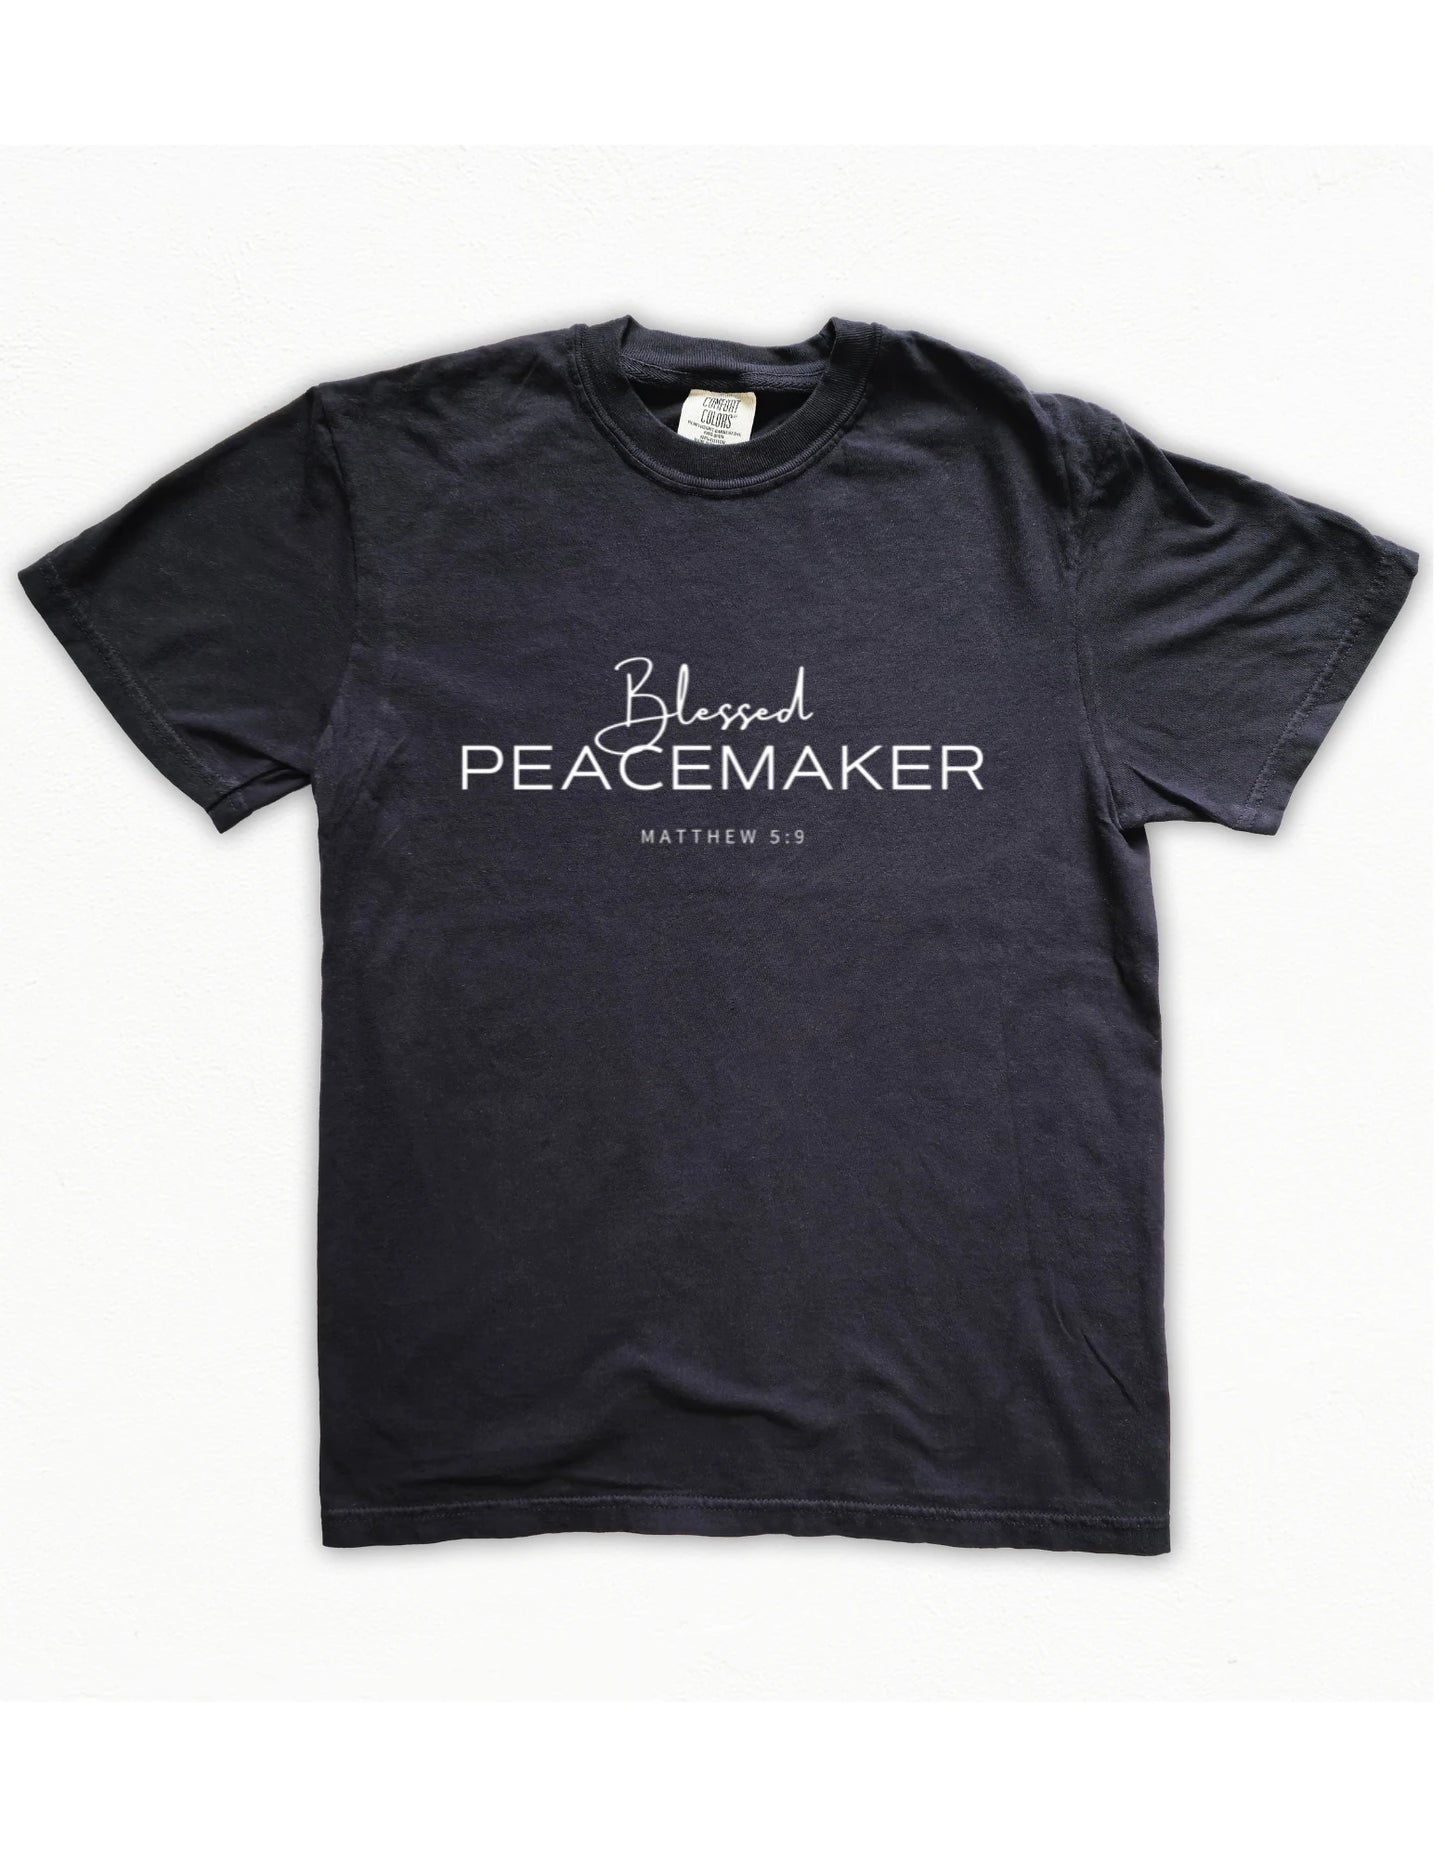 Blessed Peacemaker Tee